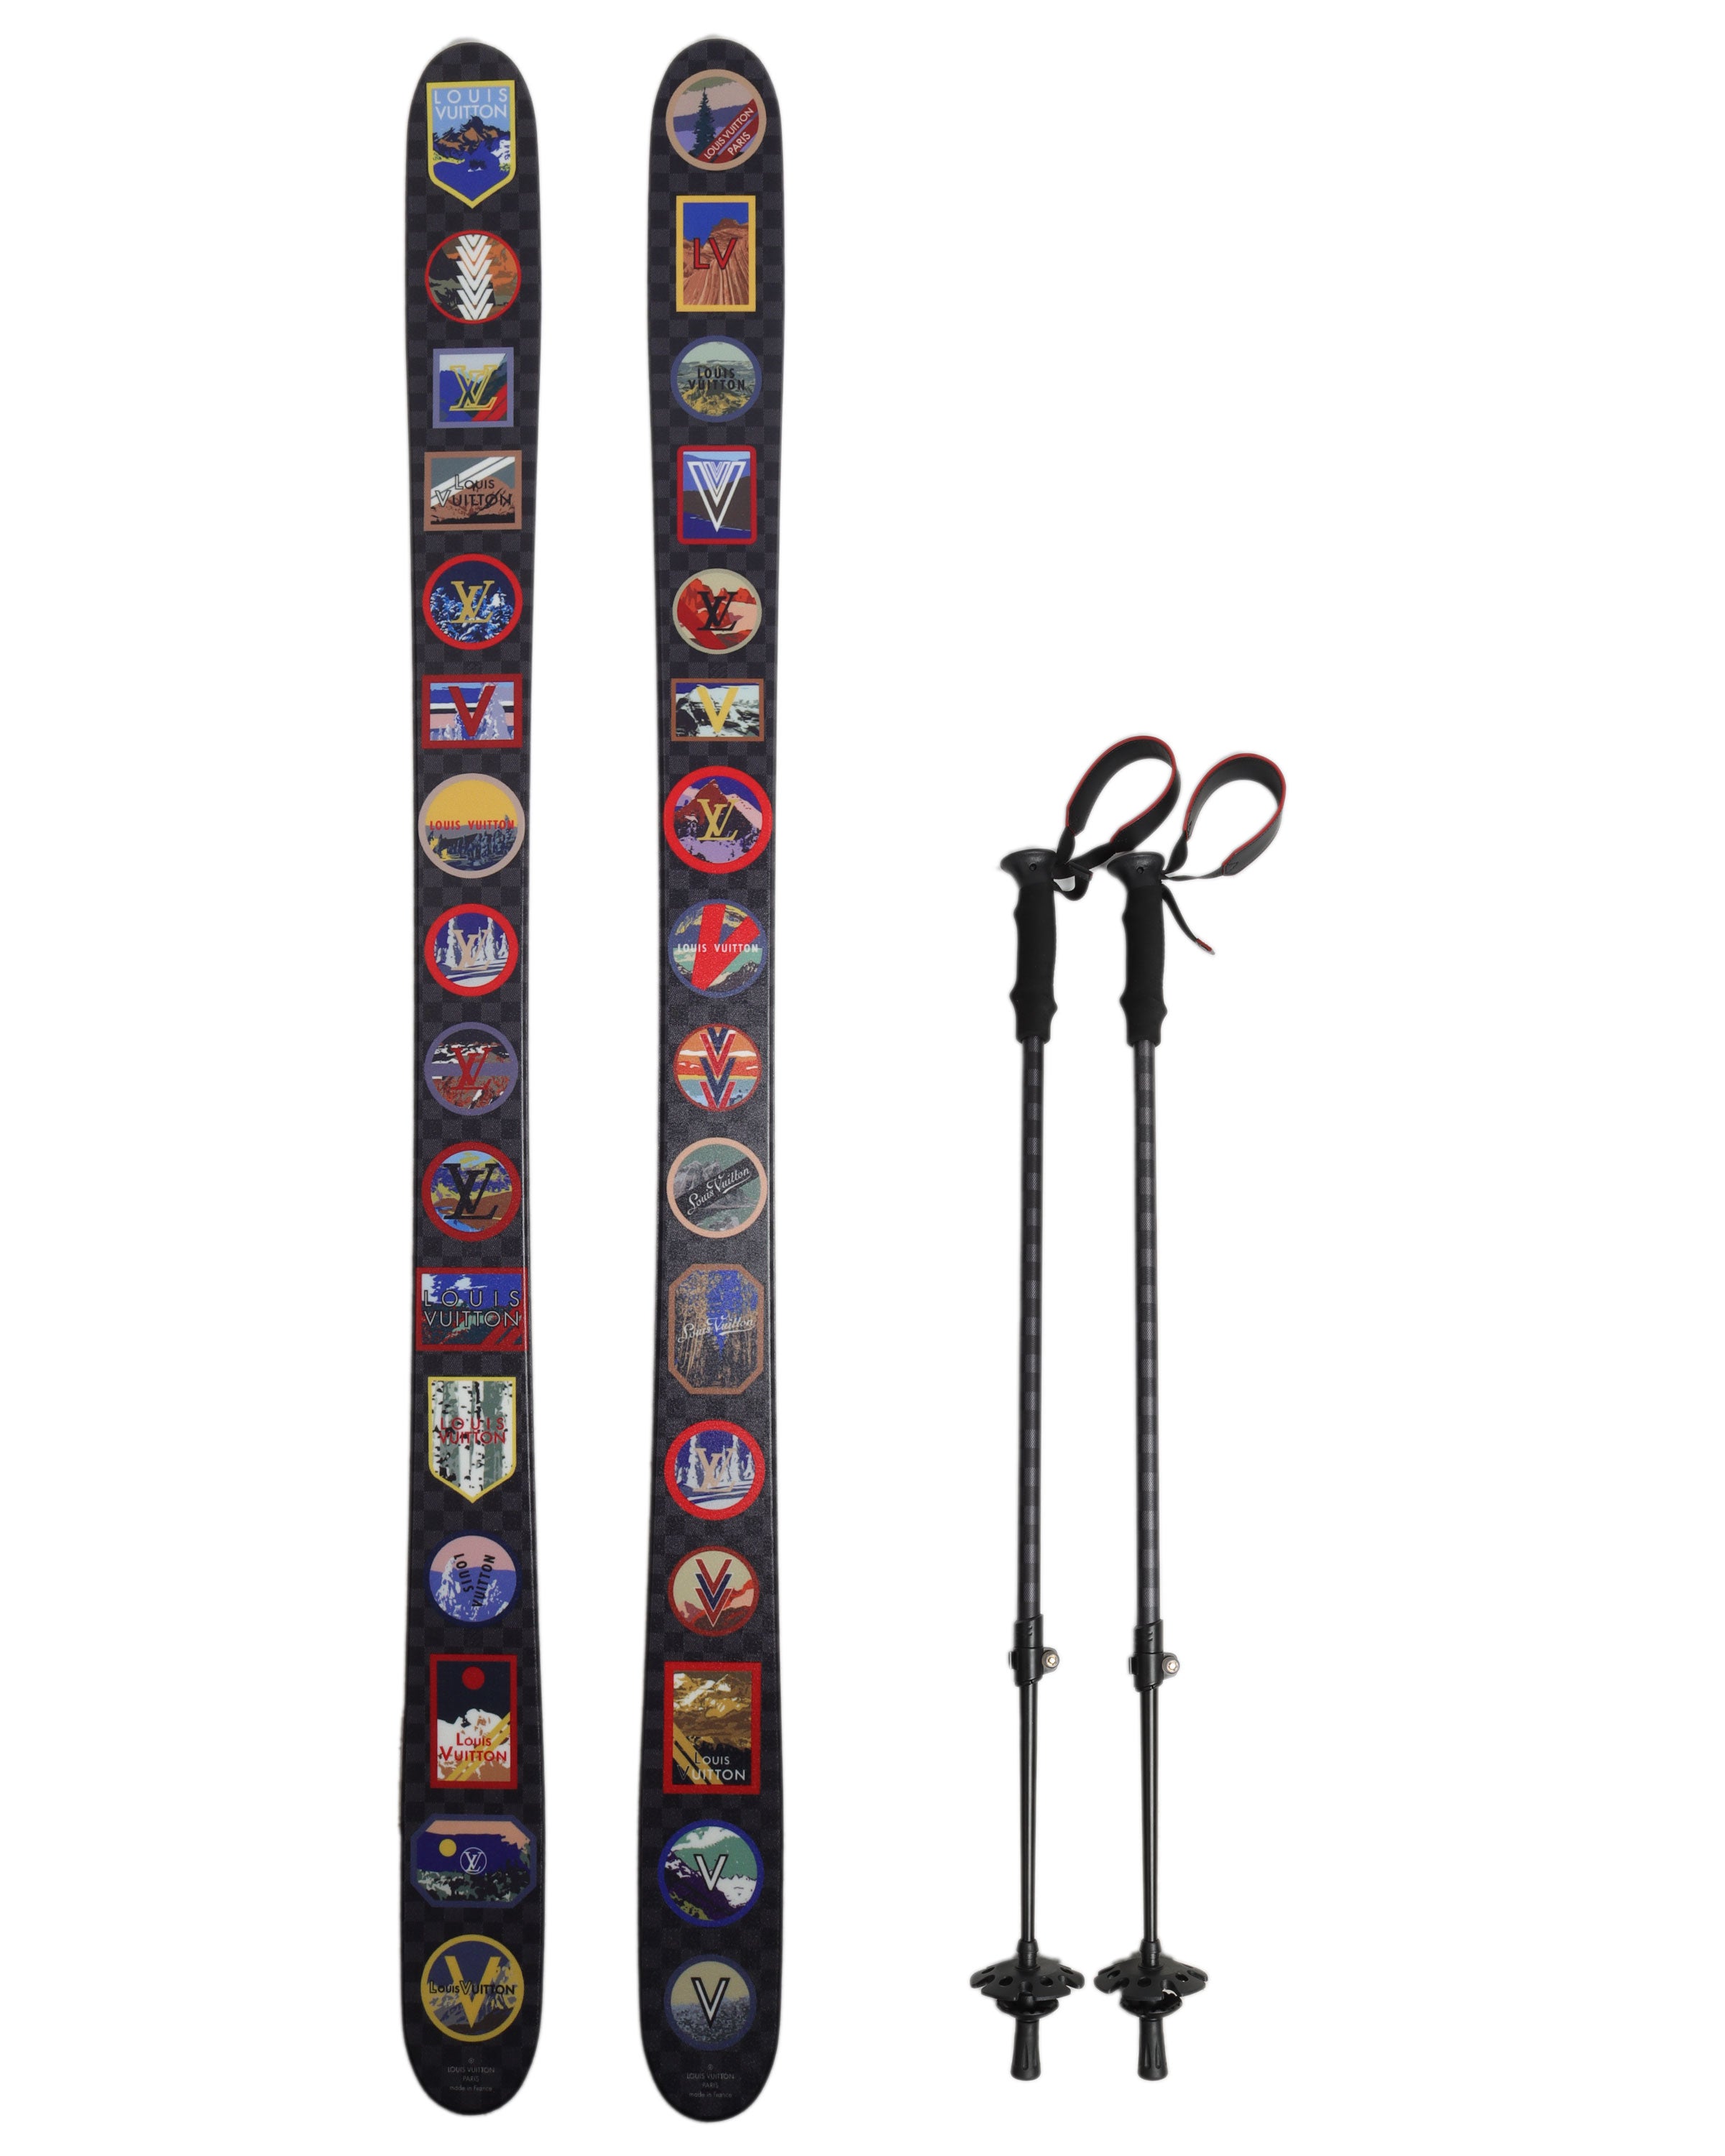 Louis Vuitton Skis: This is the 200 piece limited edition!